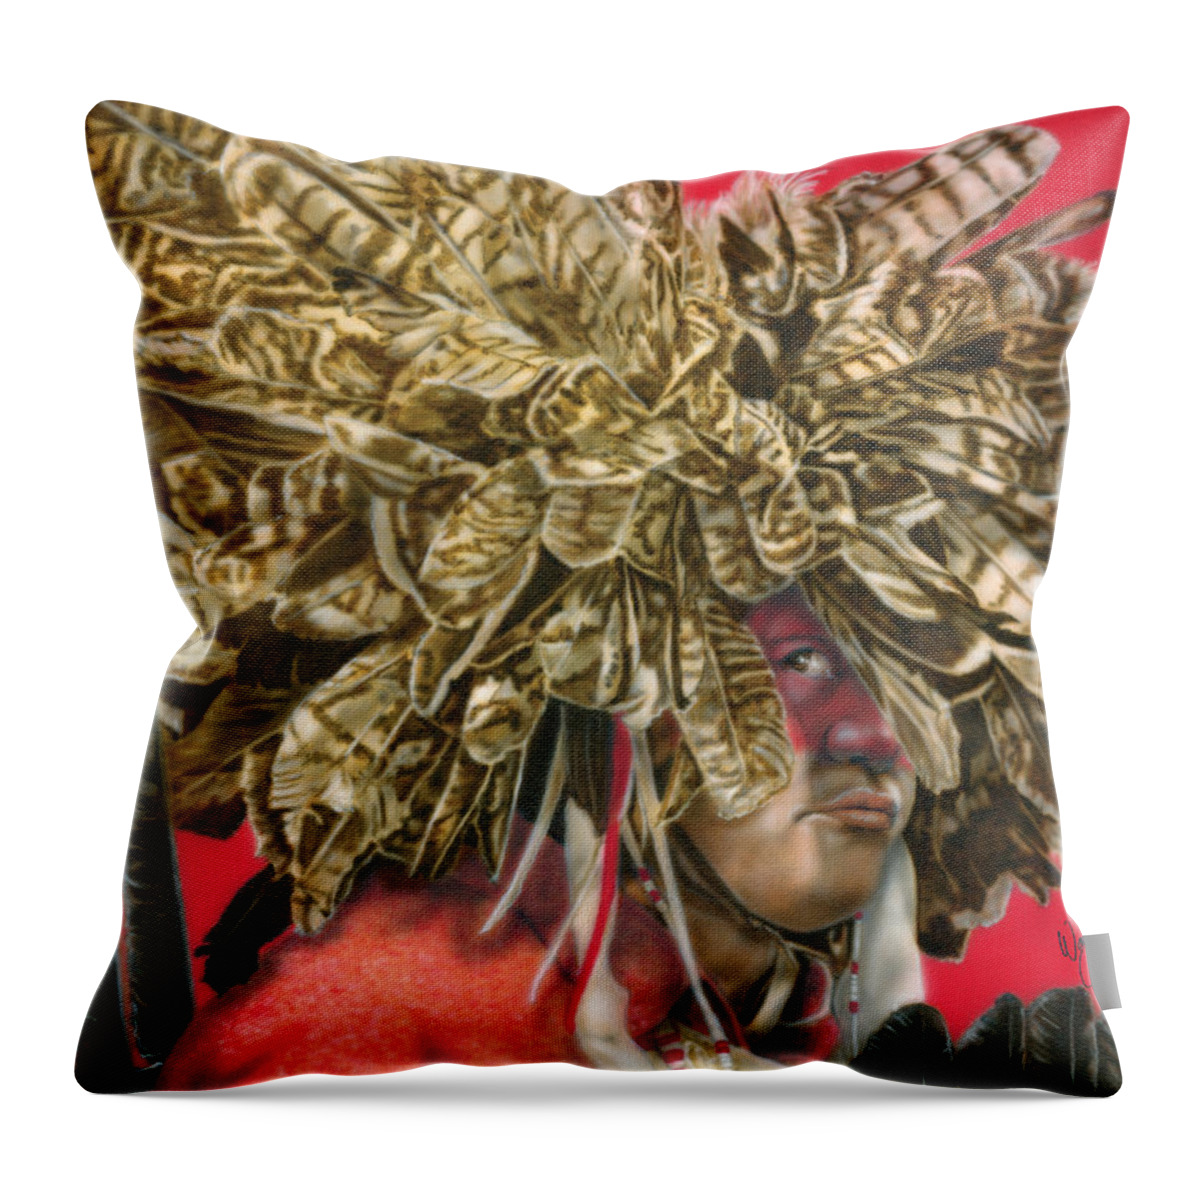  Throw Pillow featuring the painting Turkey Feather Headress by Wayne Pruse